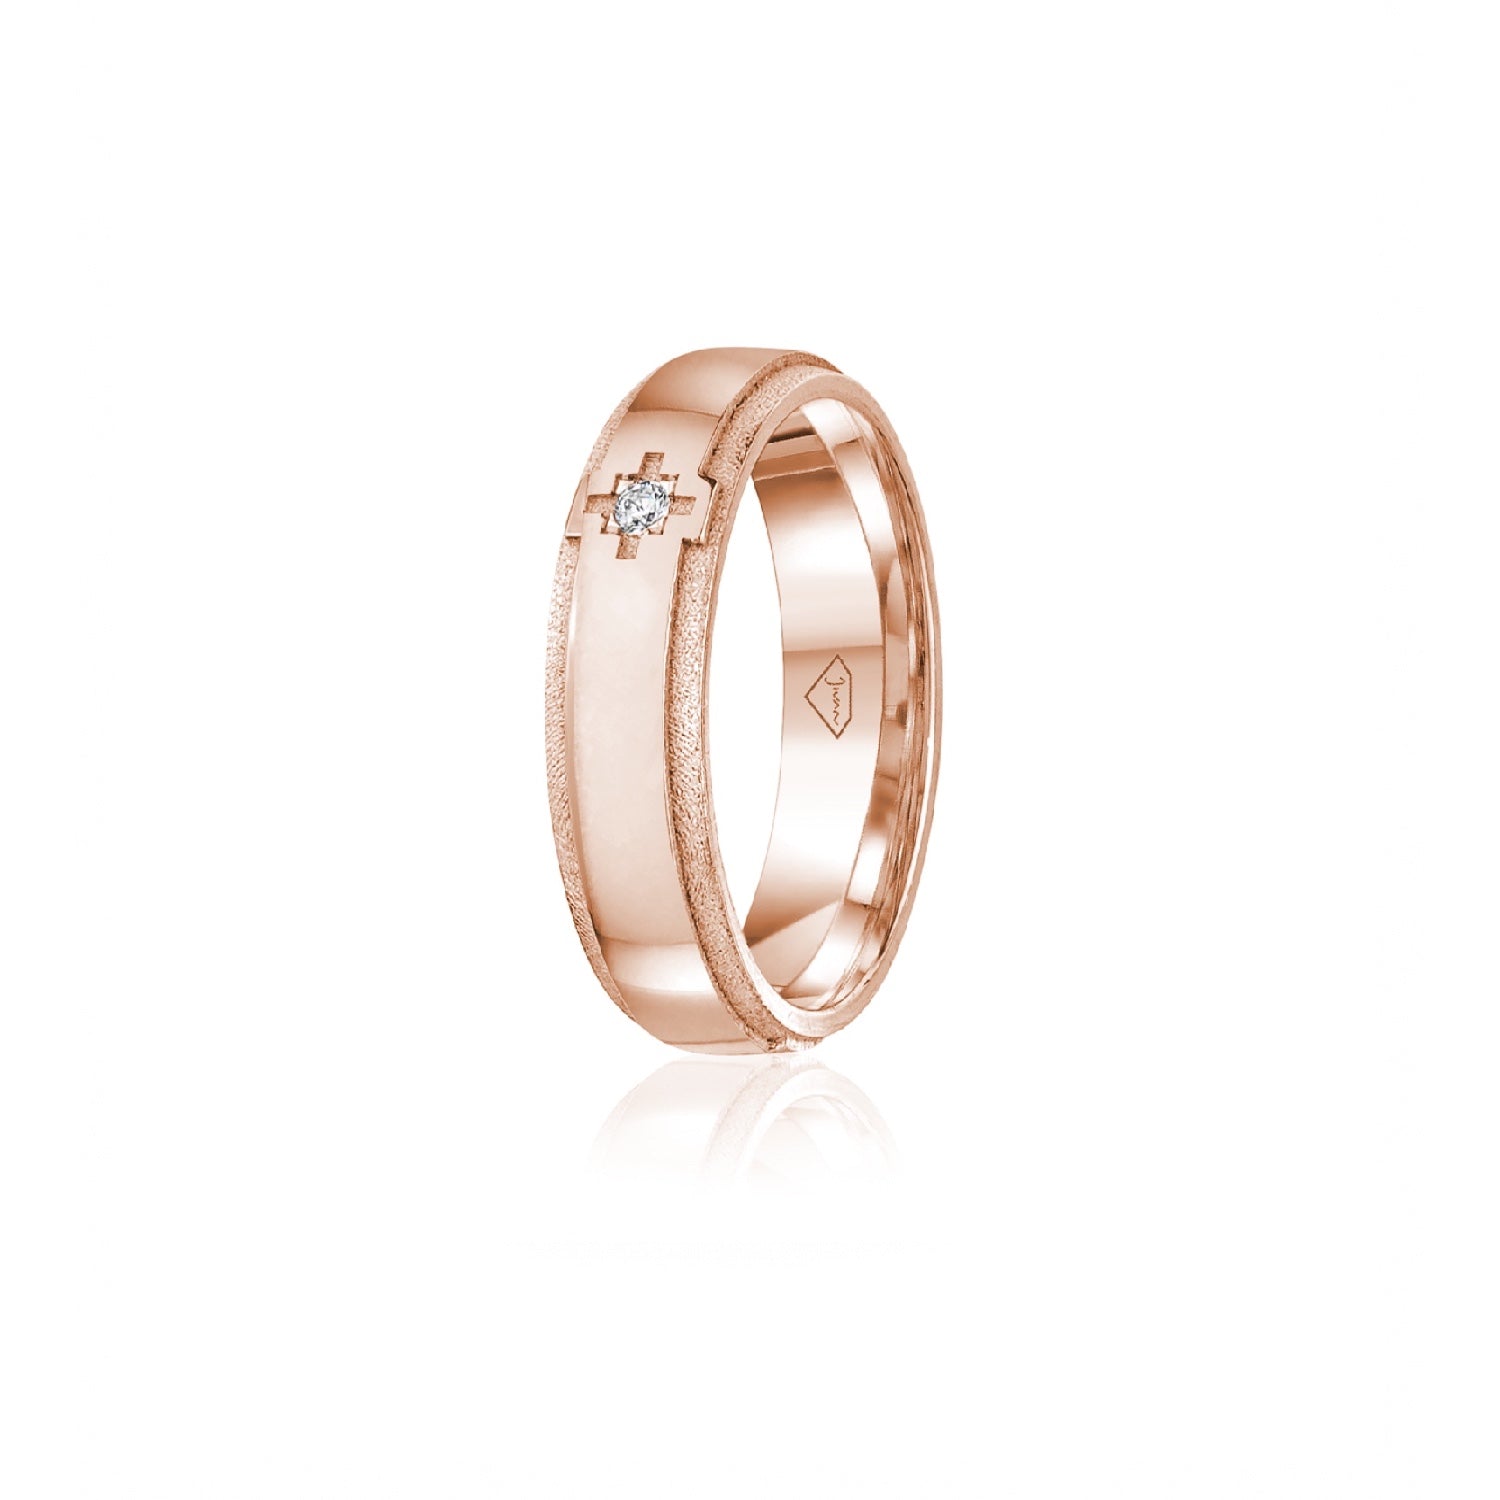 Diamond Accent Polished Finish Bevelled Edge 6-7 mm Wedding Ring in Rose Gold